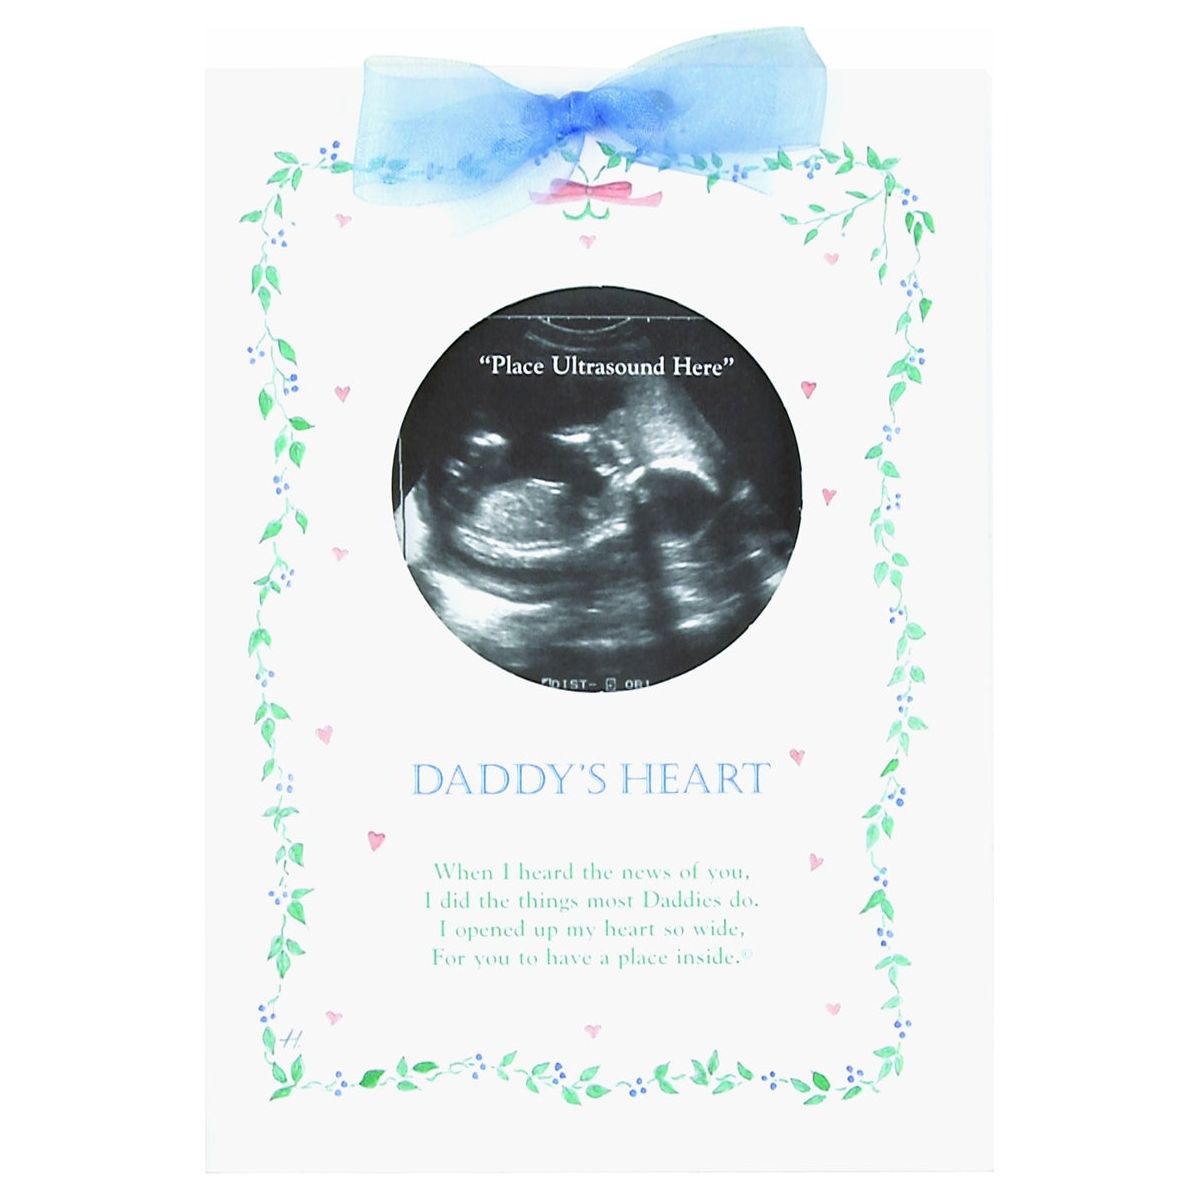 5x7 Daddy's Heart greeting card with new baby poem, blue organza accent ribbon, and circular opening for baby's ultrasound picture.